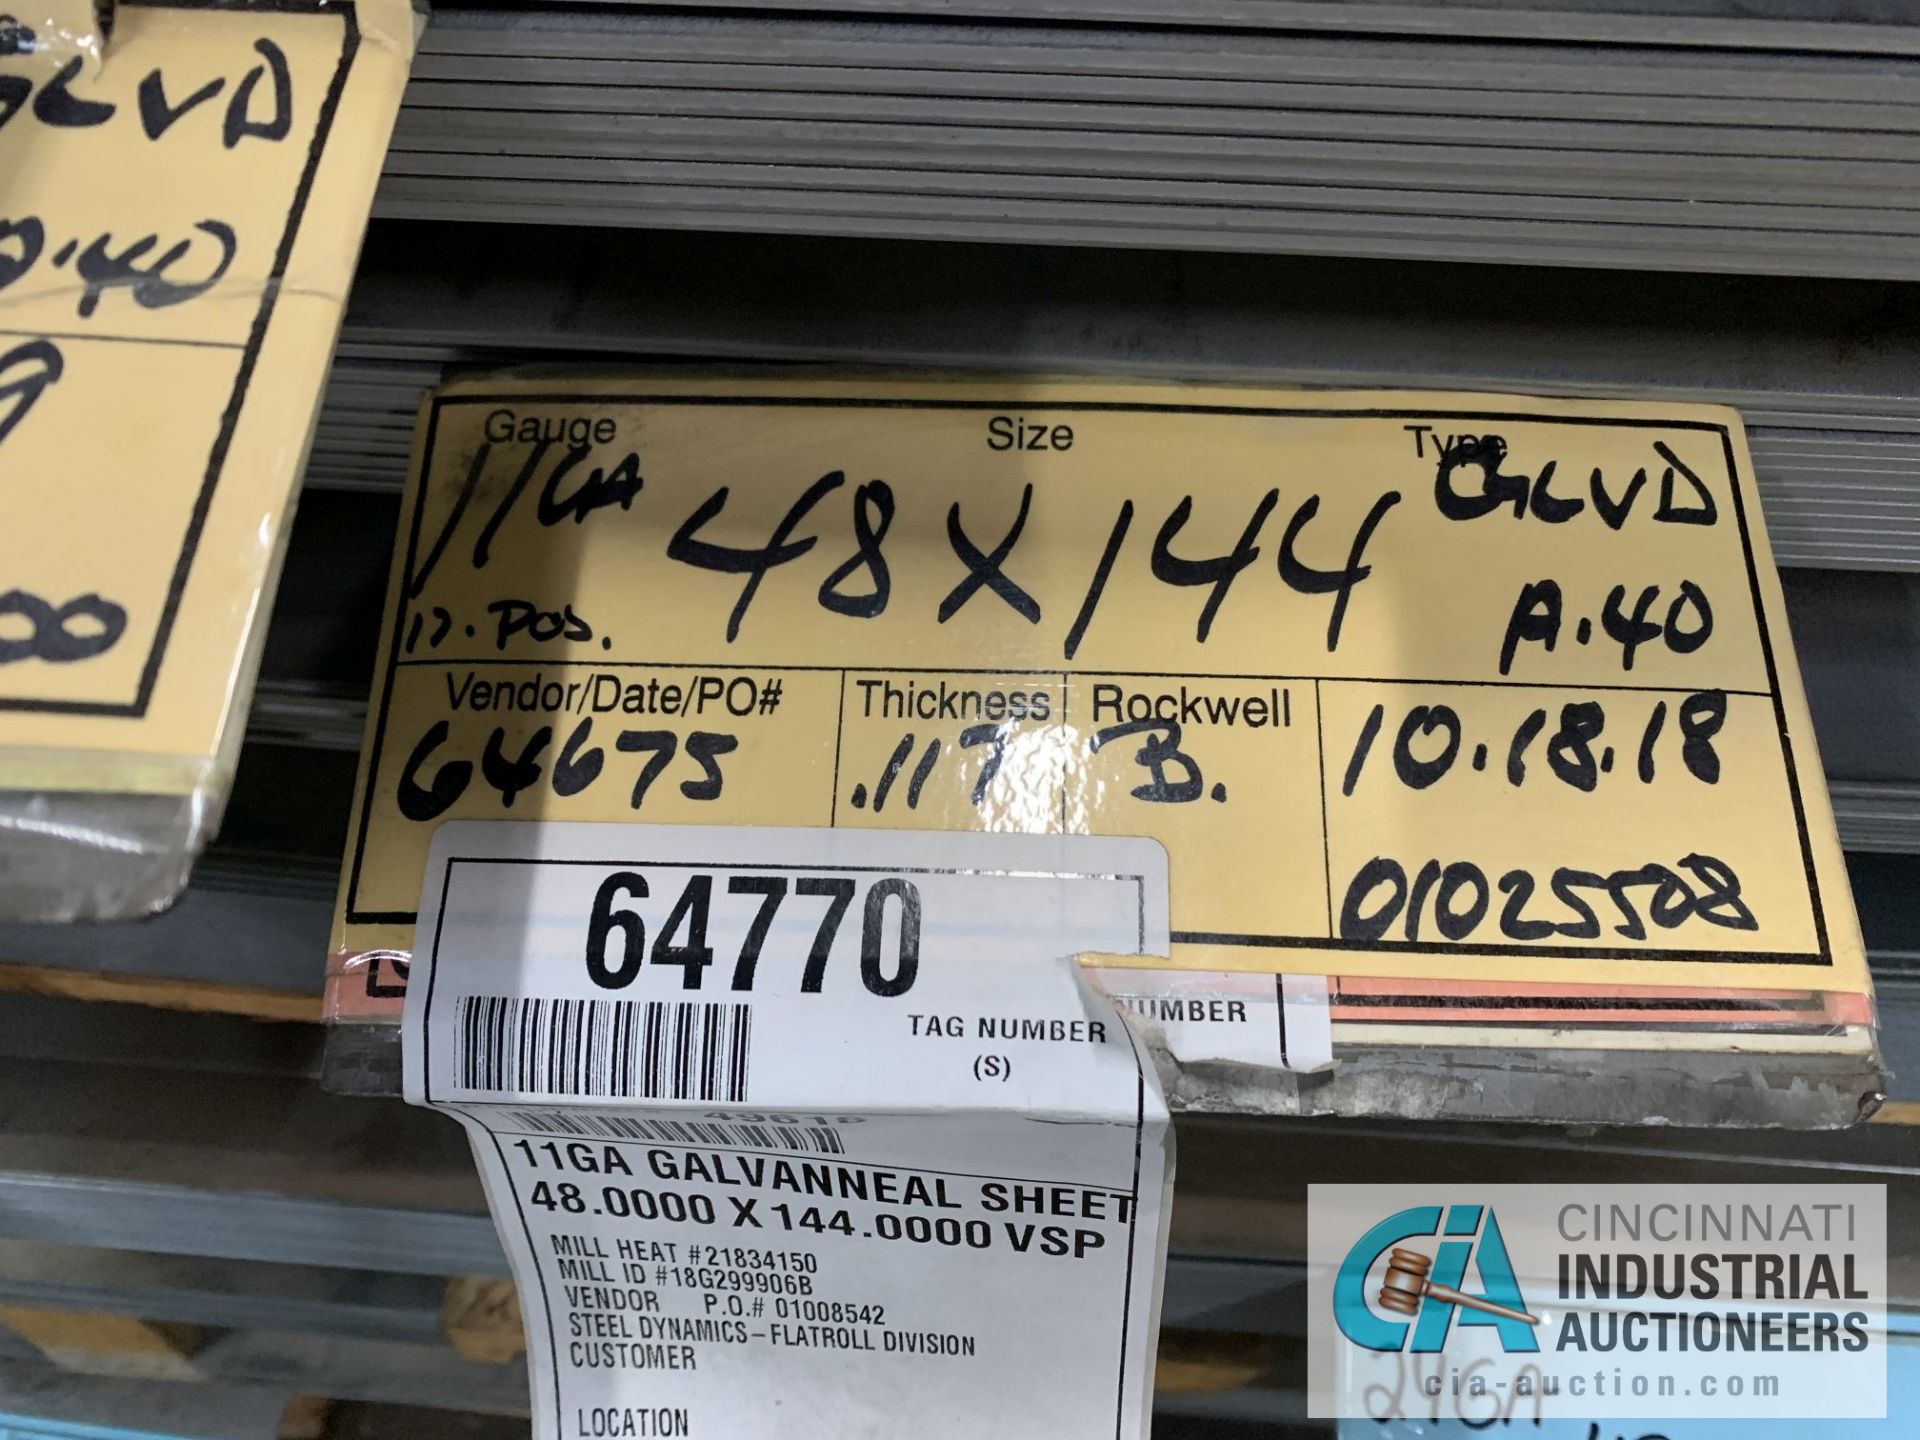 (LOT) APPROX. 32,228 LBS. COATED SHEET STEEL, 1-STACK, 12-BUNDLES, SEE INVENTORY FOR LISTING. - Image 8 of 13